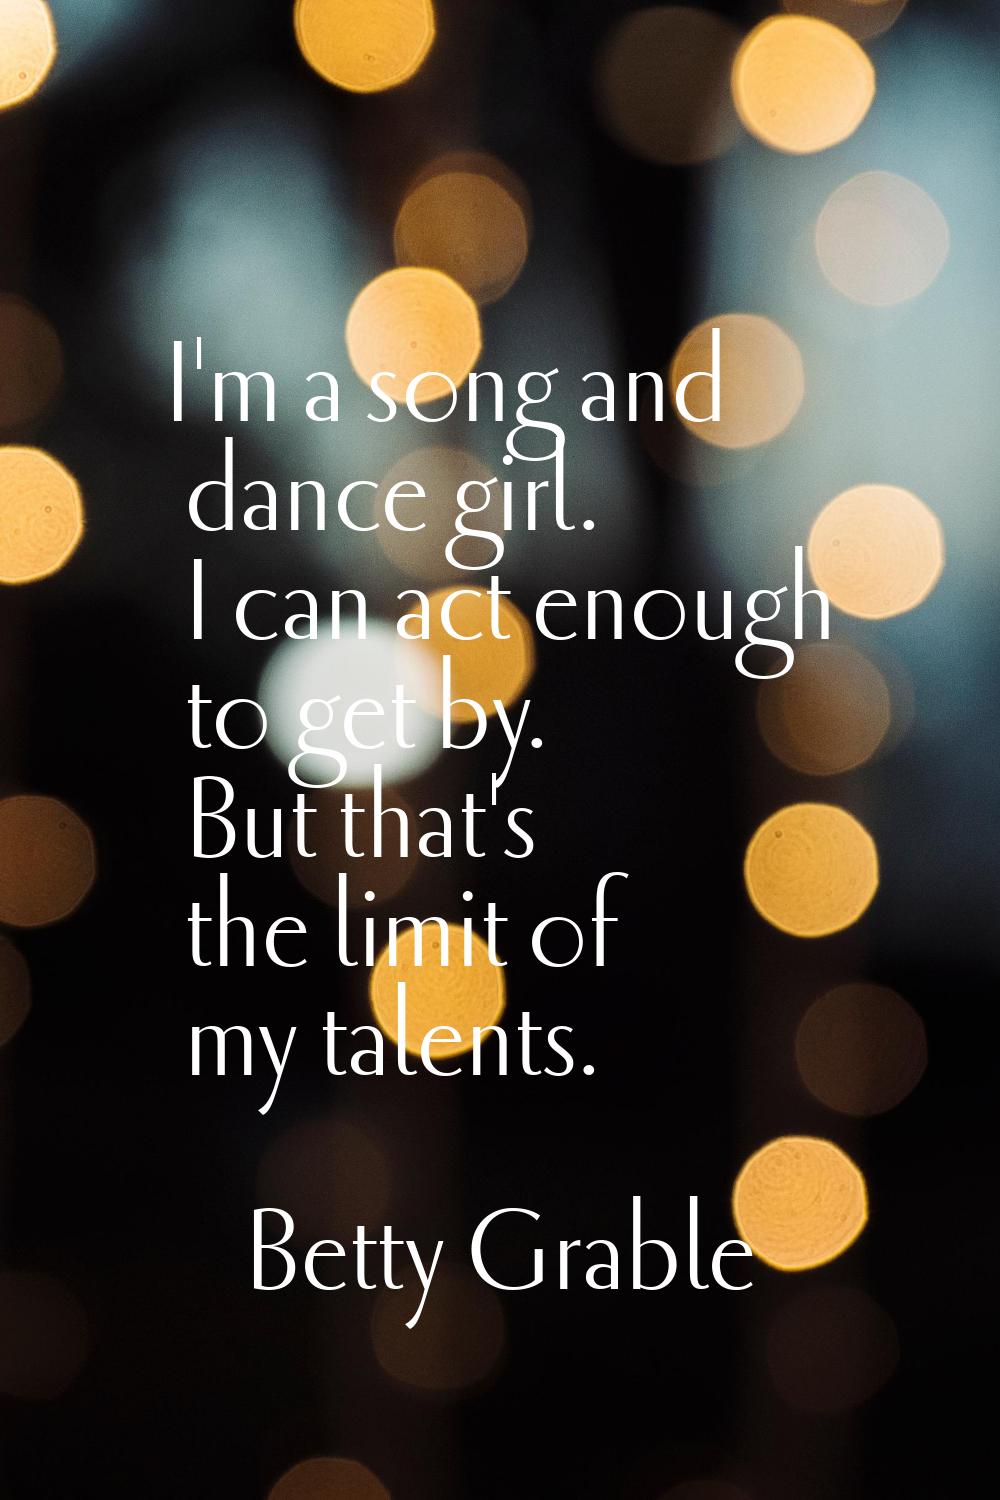 I'm a song and dance girl. I can act enough to get by. But that's the limit of my talents.